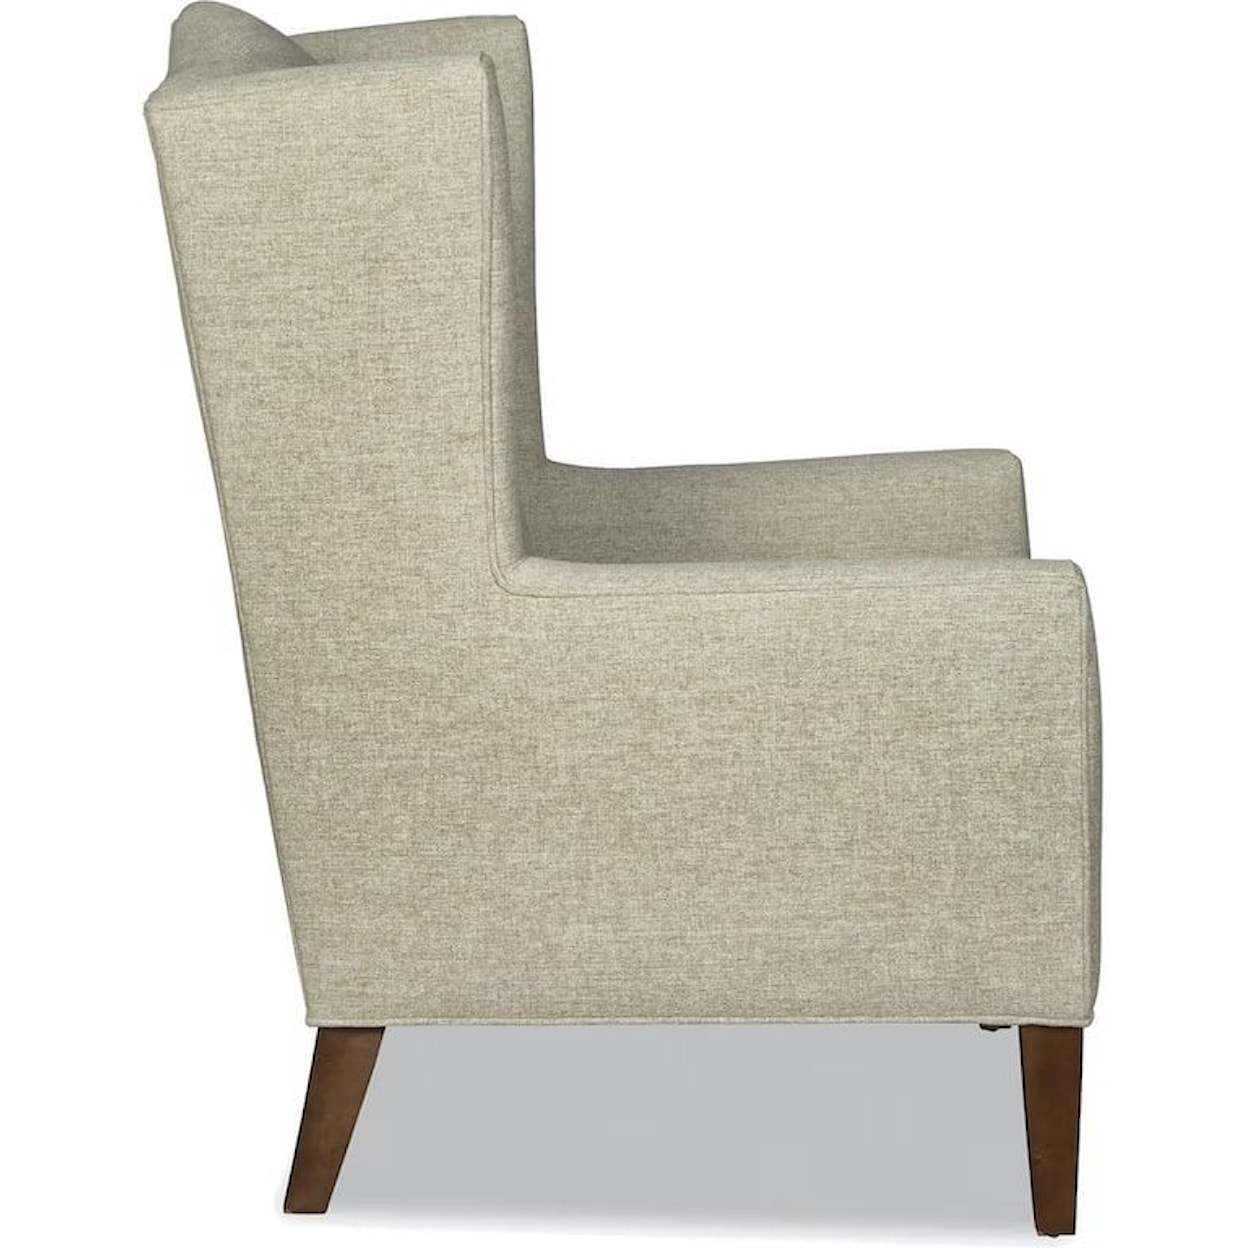 Craftmaster Accent Chairs Wing Chair